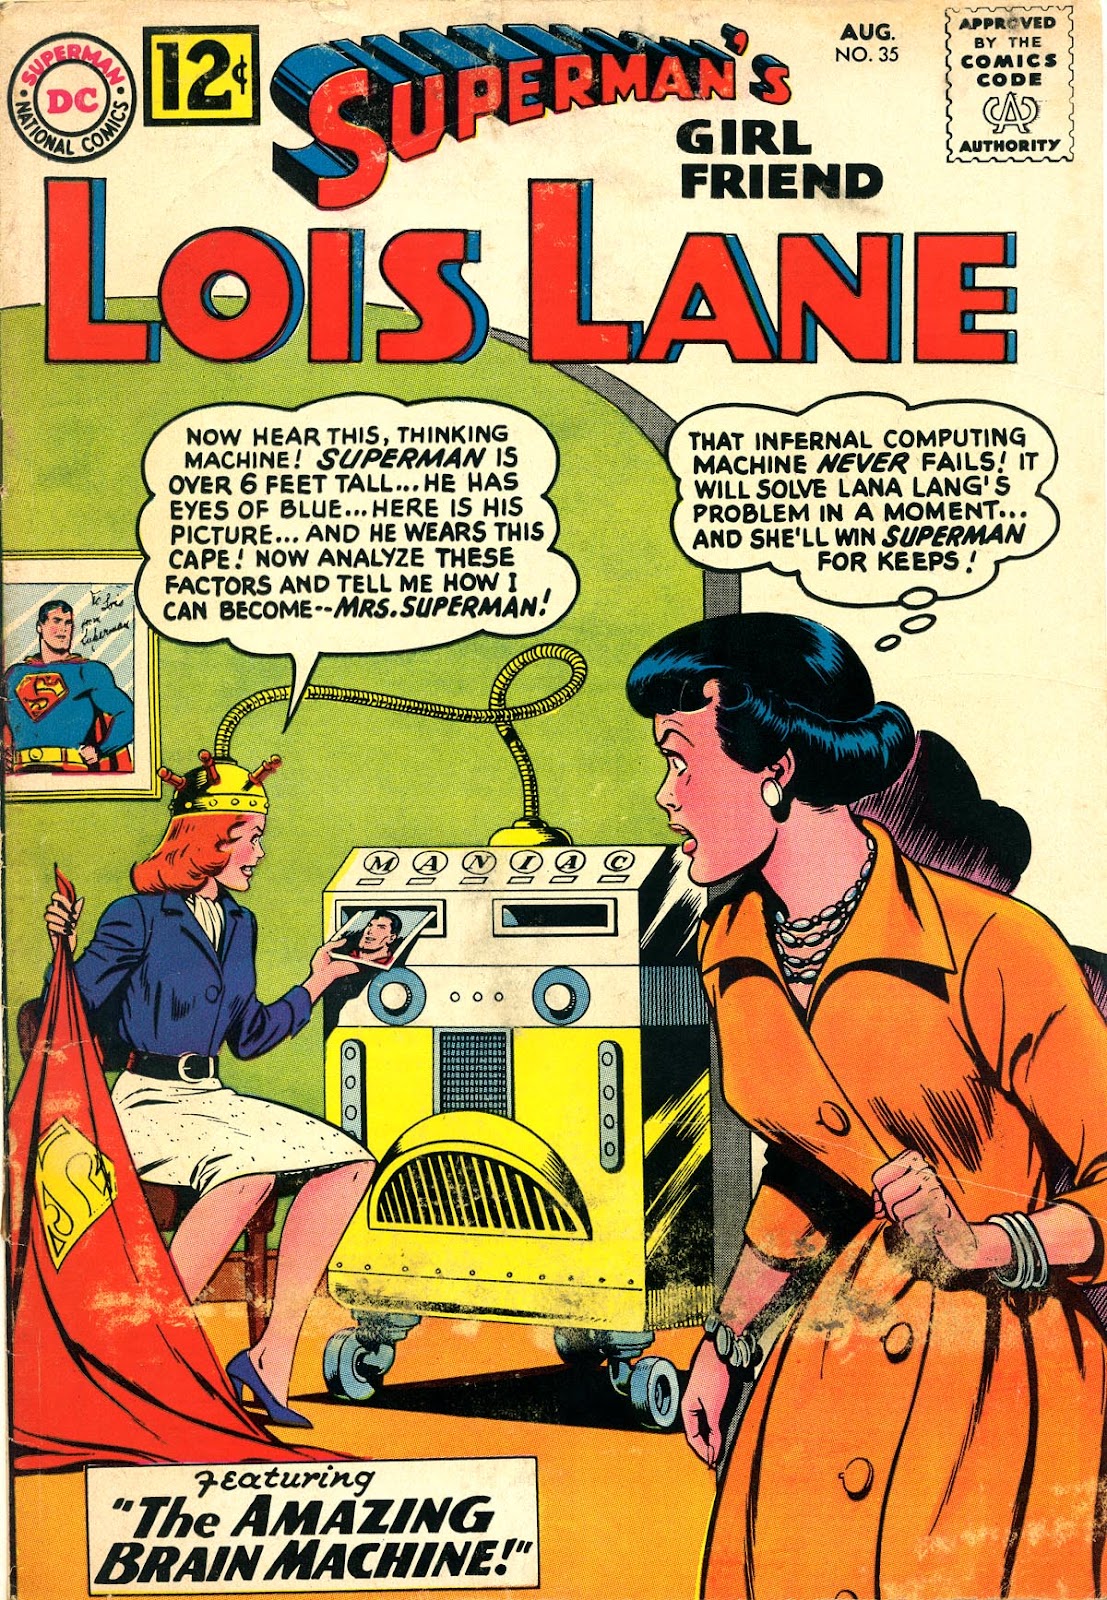 Superman's Girl Friend, Lois Lane issue 35 - Page 1